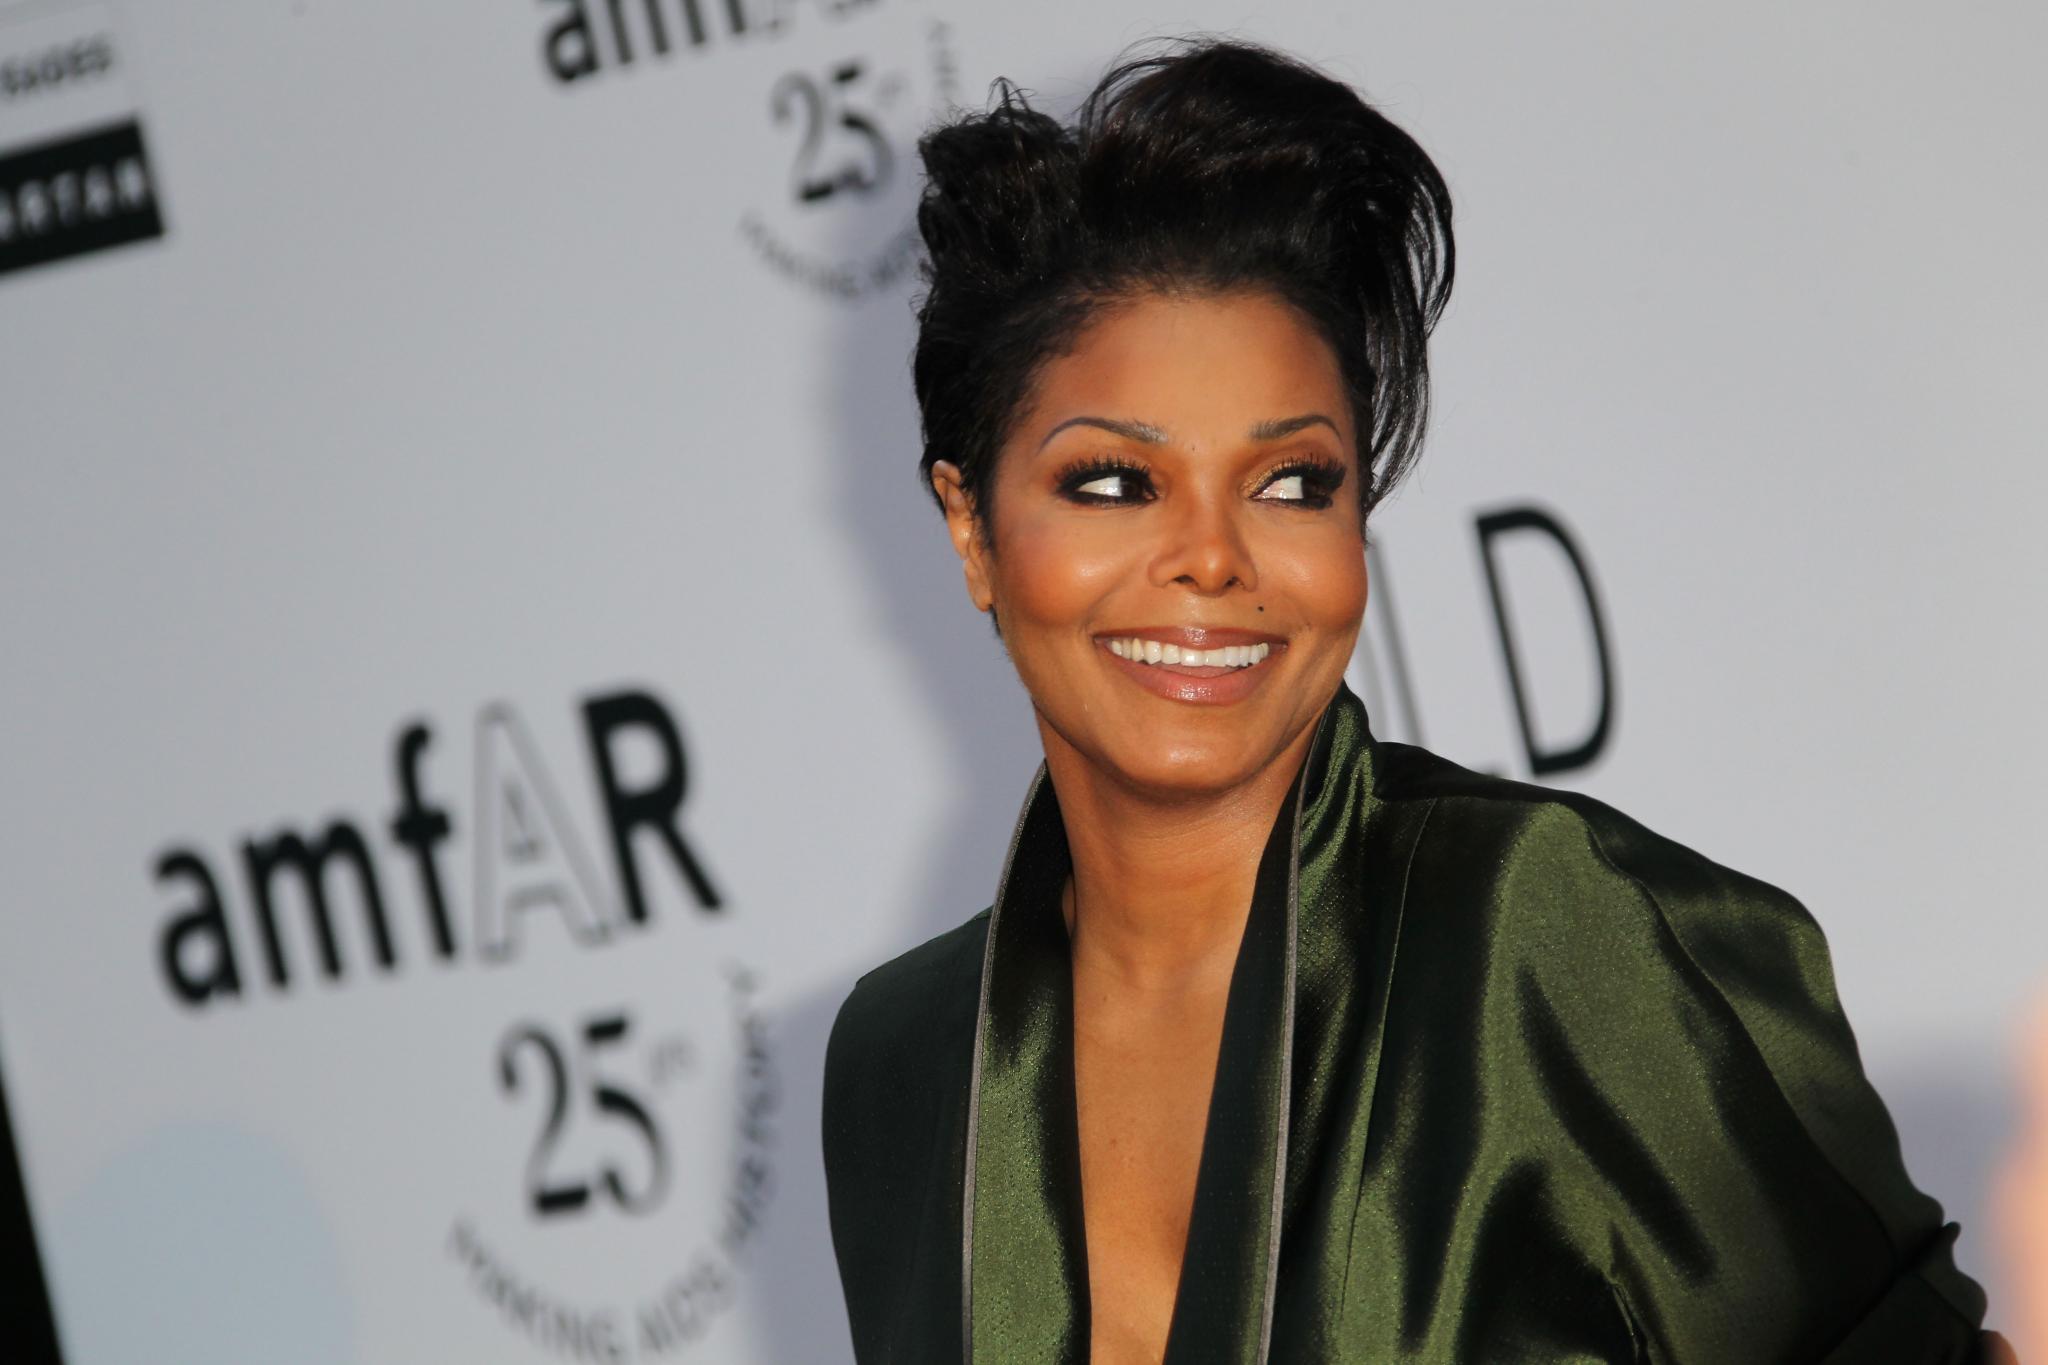 Janet Jackson's New Single is Set to Release in 30 Days